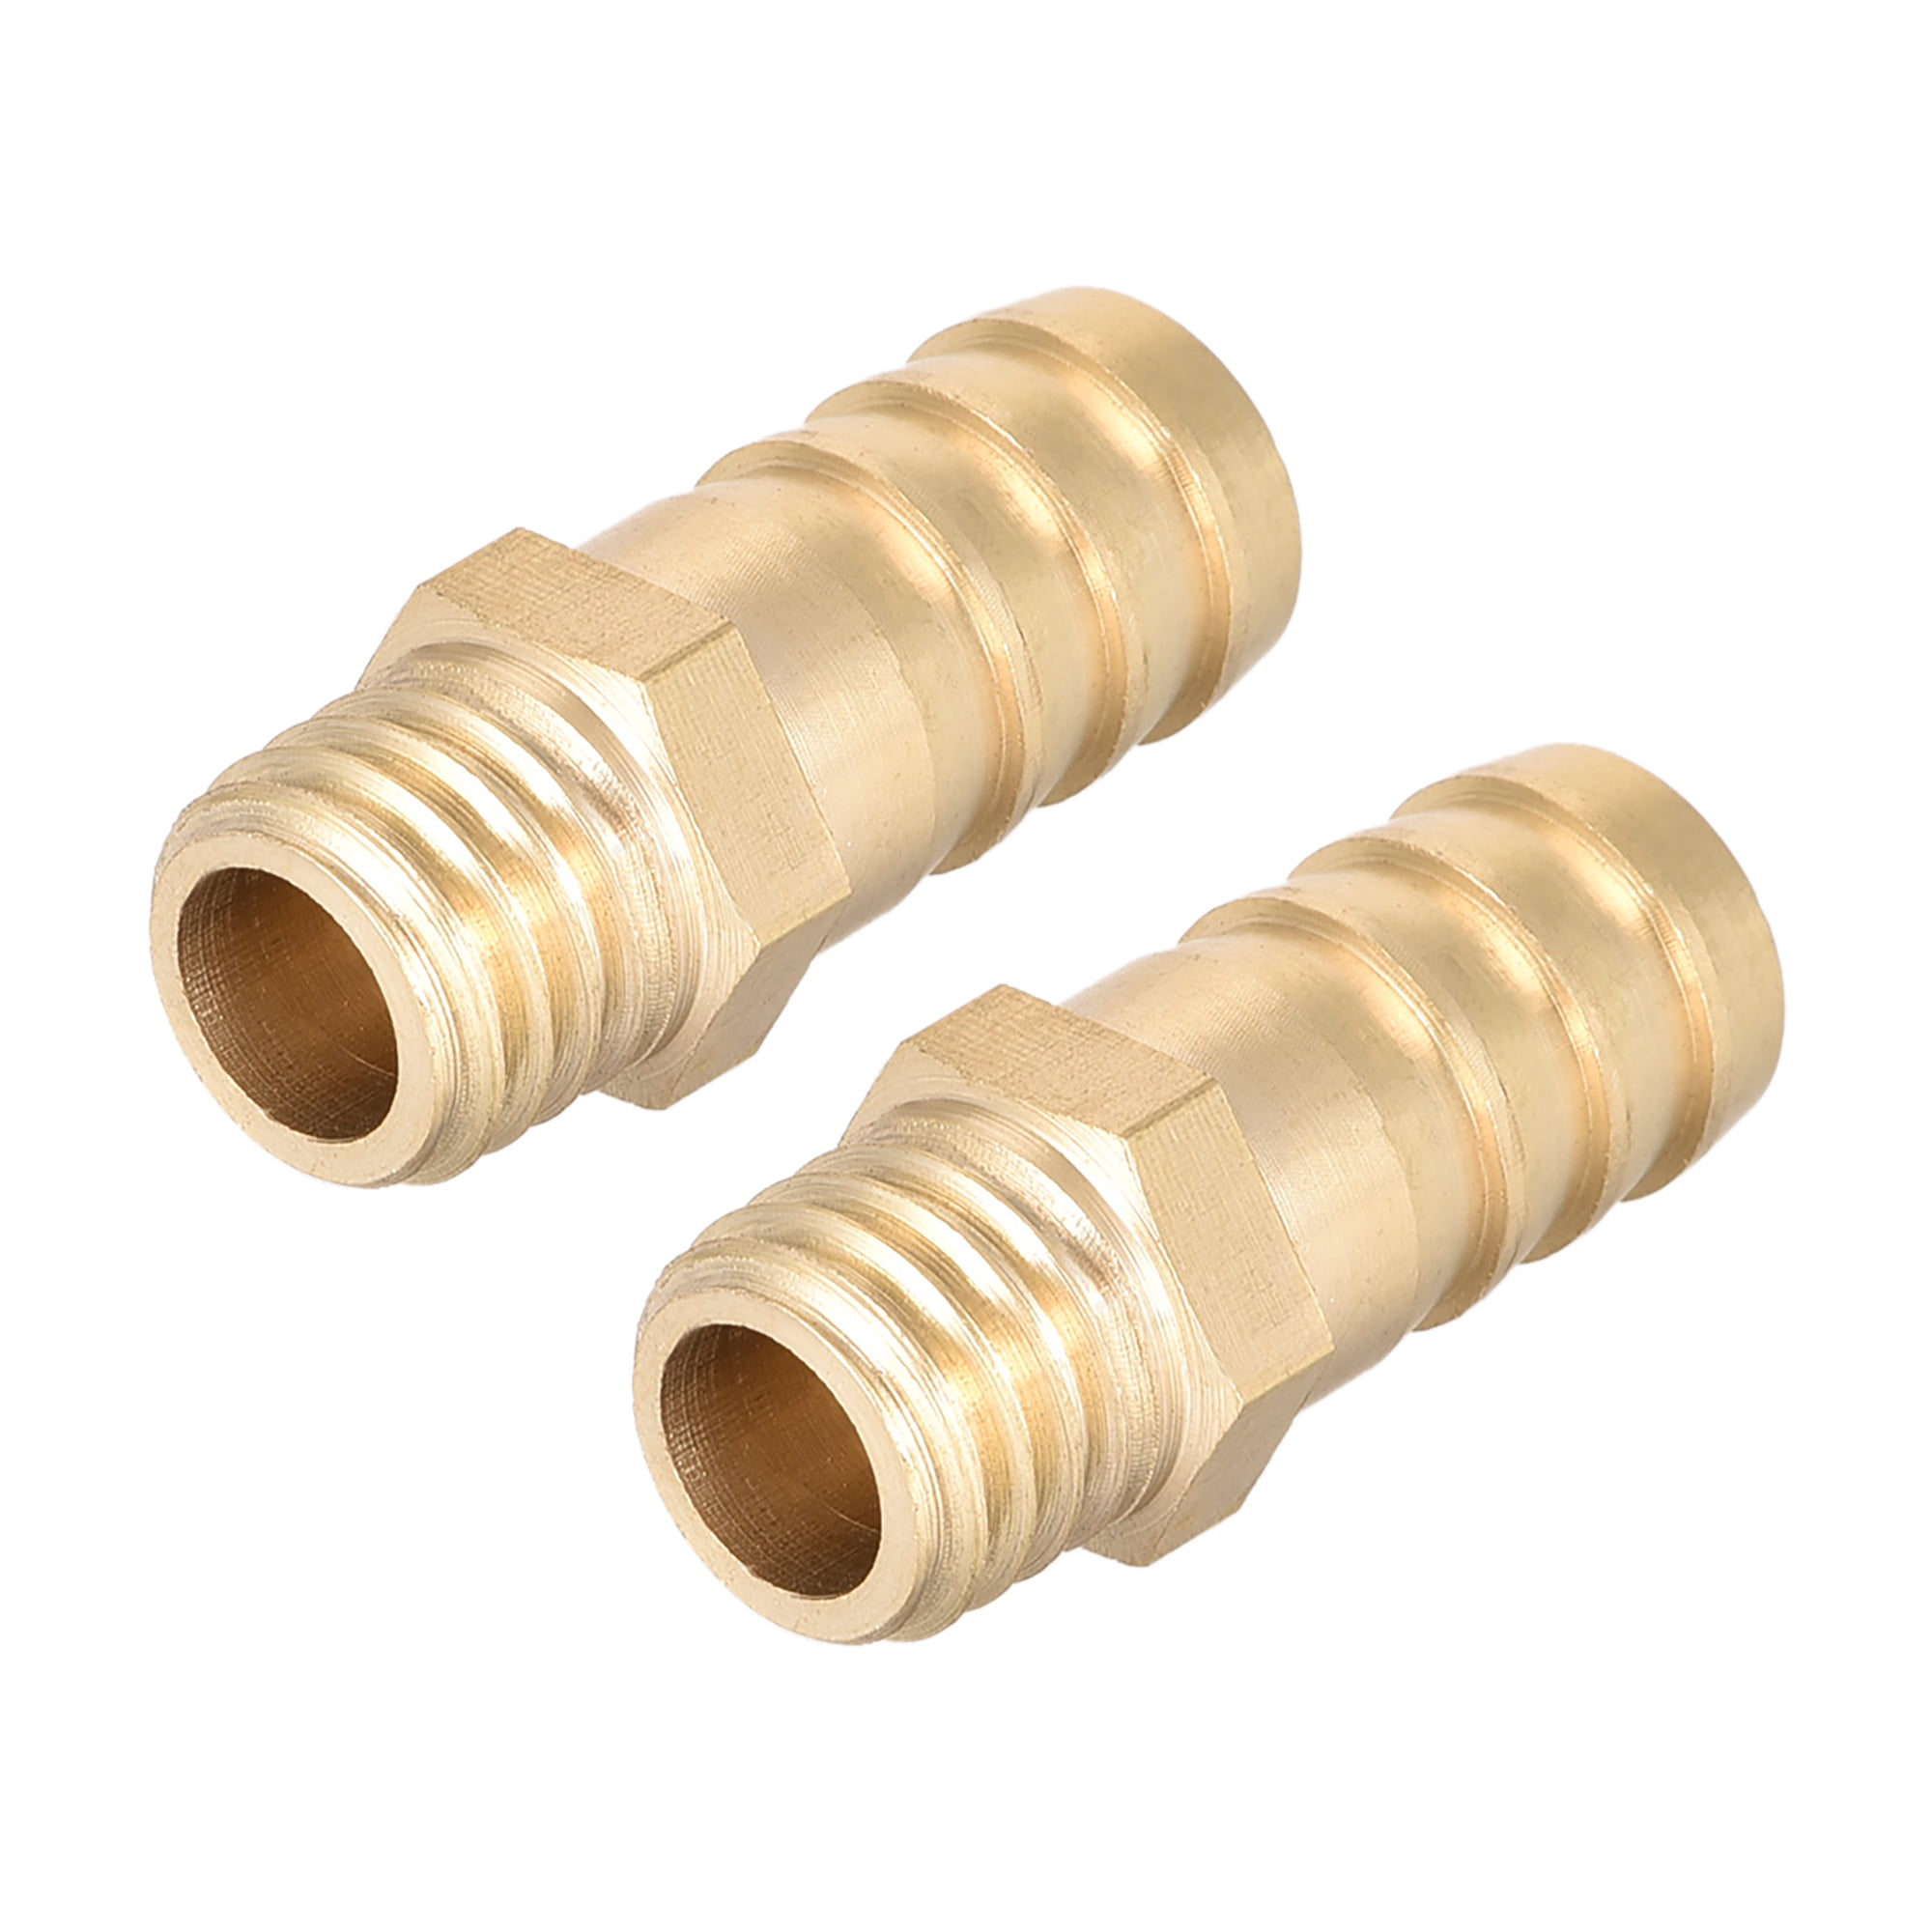 2x Brass Reducer Metric Female Male Reducing Bush Fitting Gas Air Water Fuel 